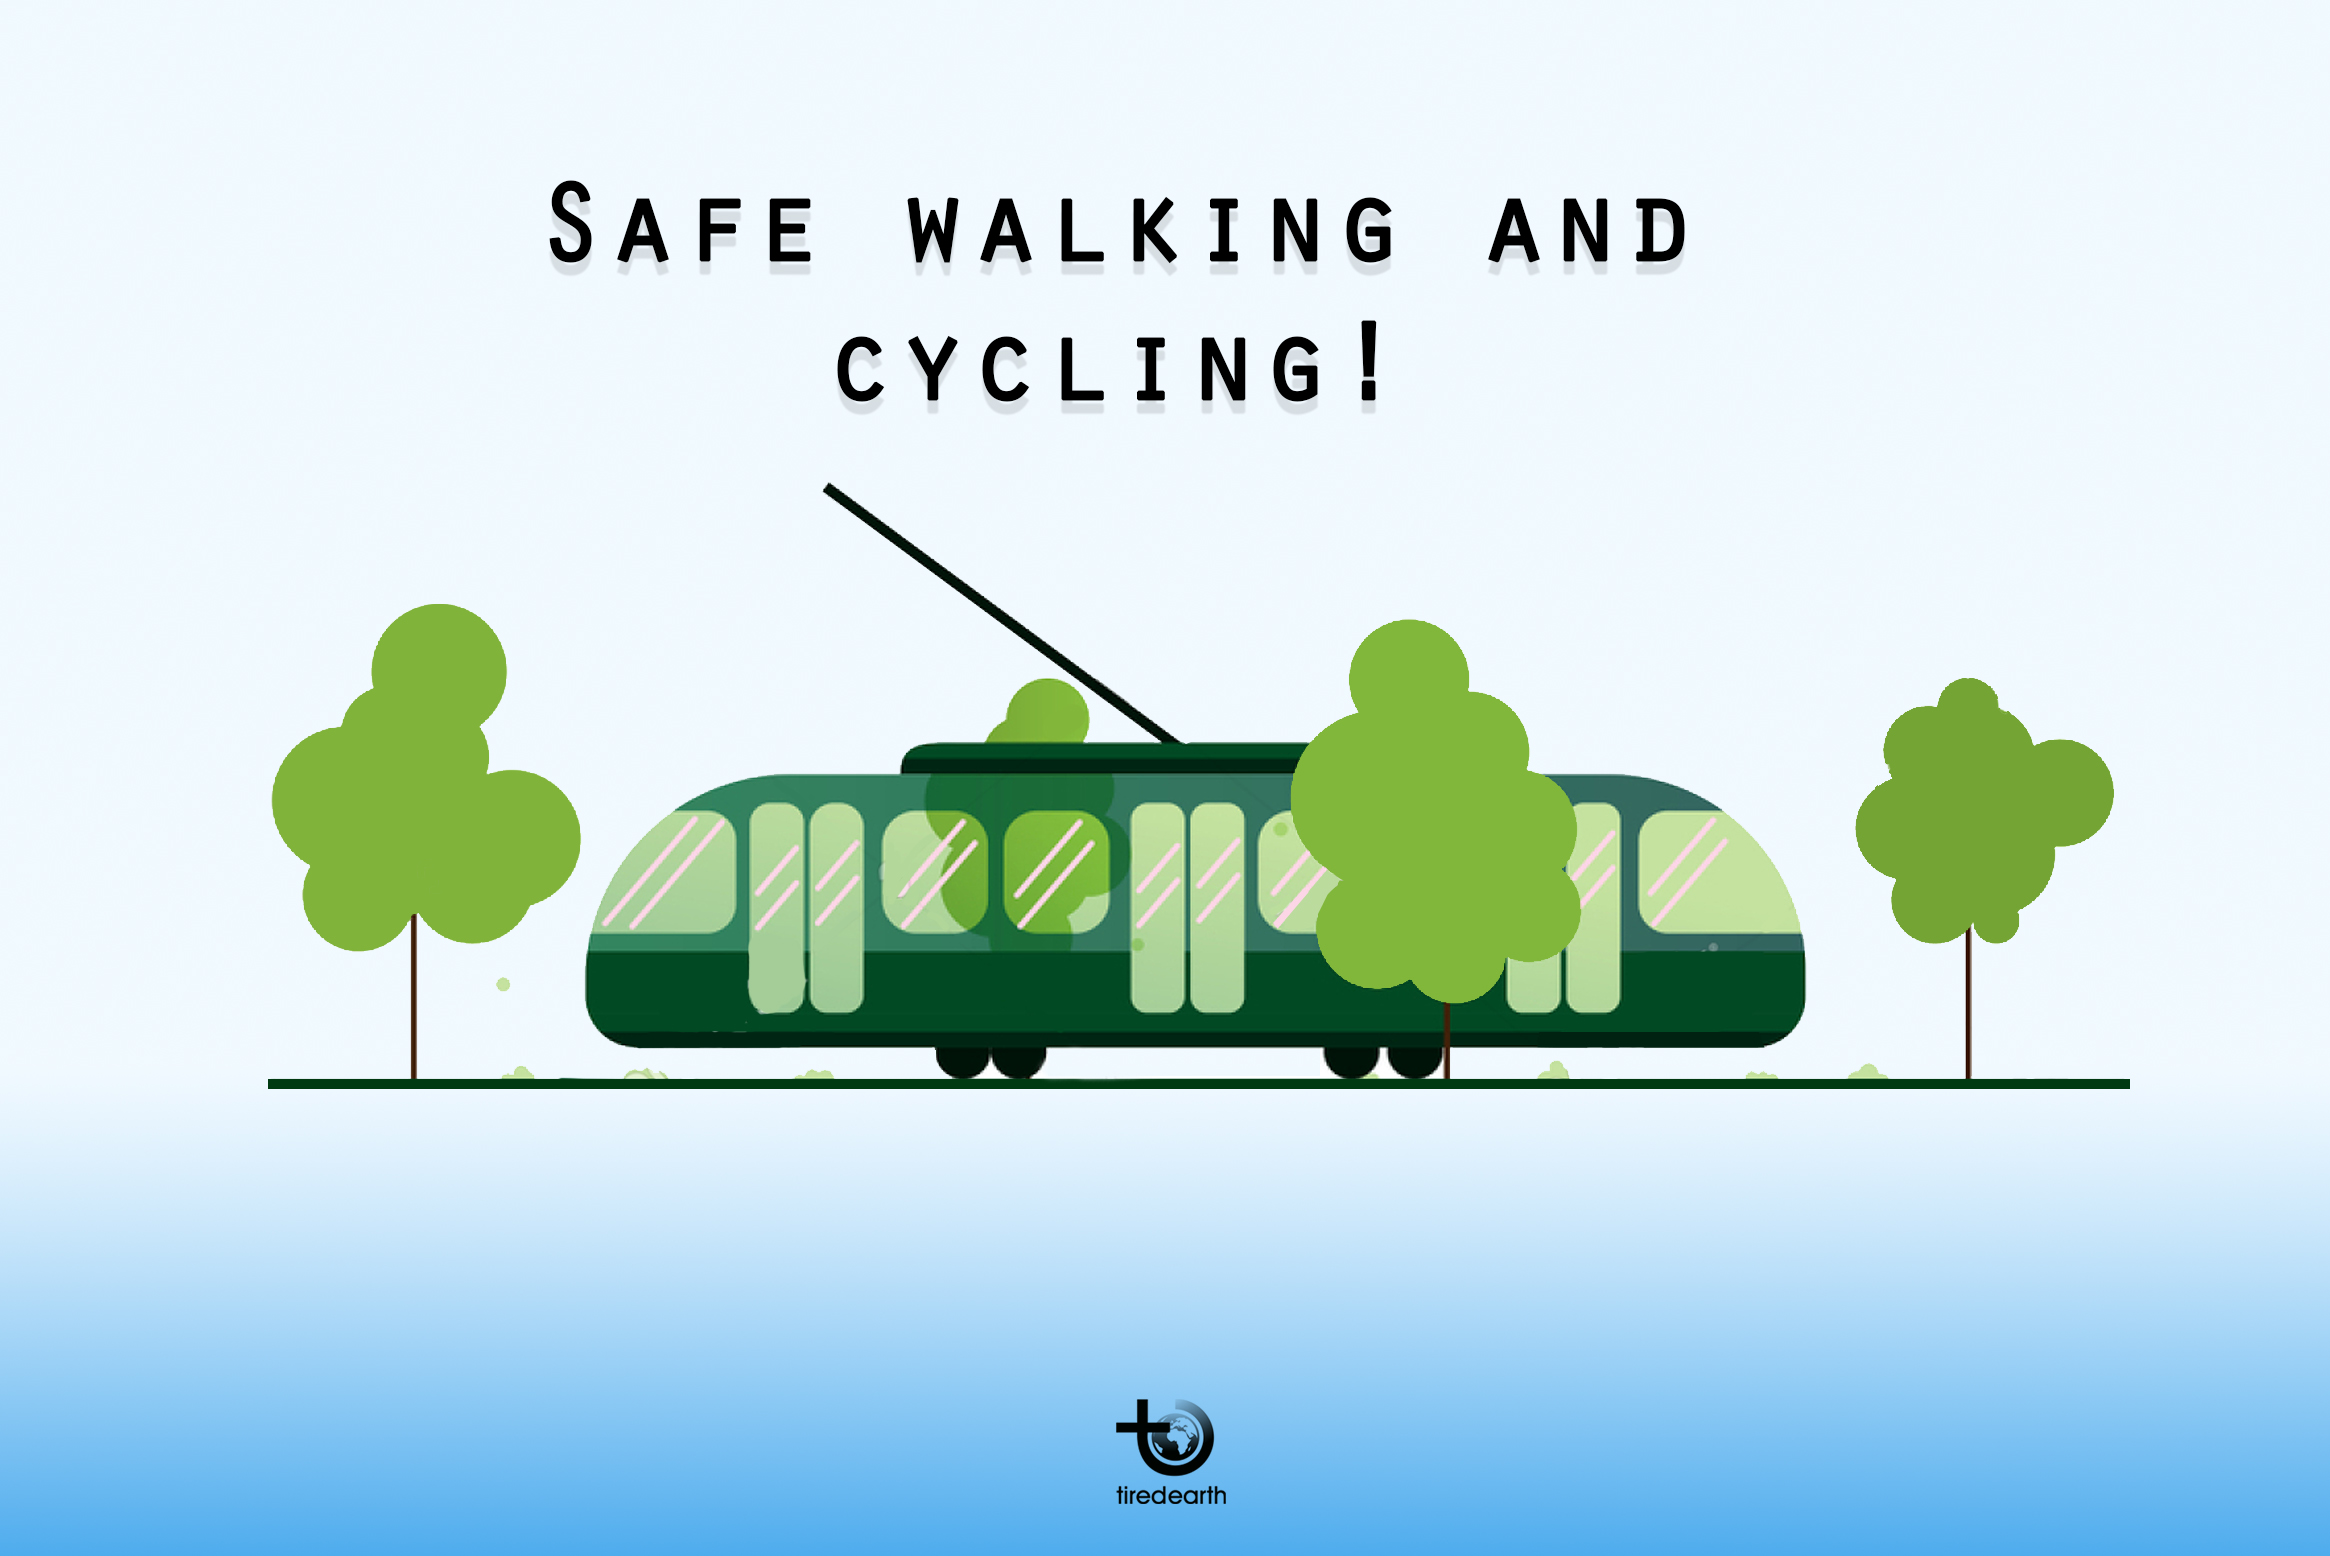 Walking and Cycling; Two Great Way to Help the Environment